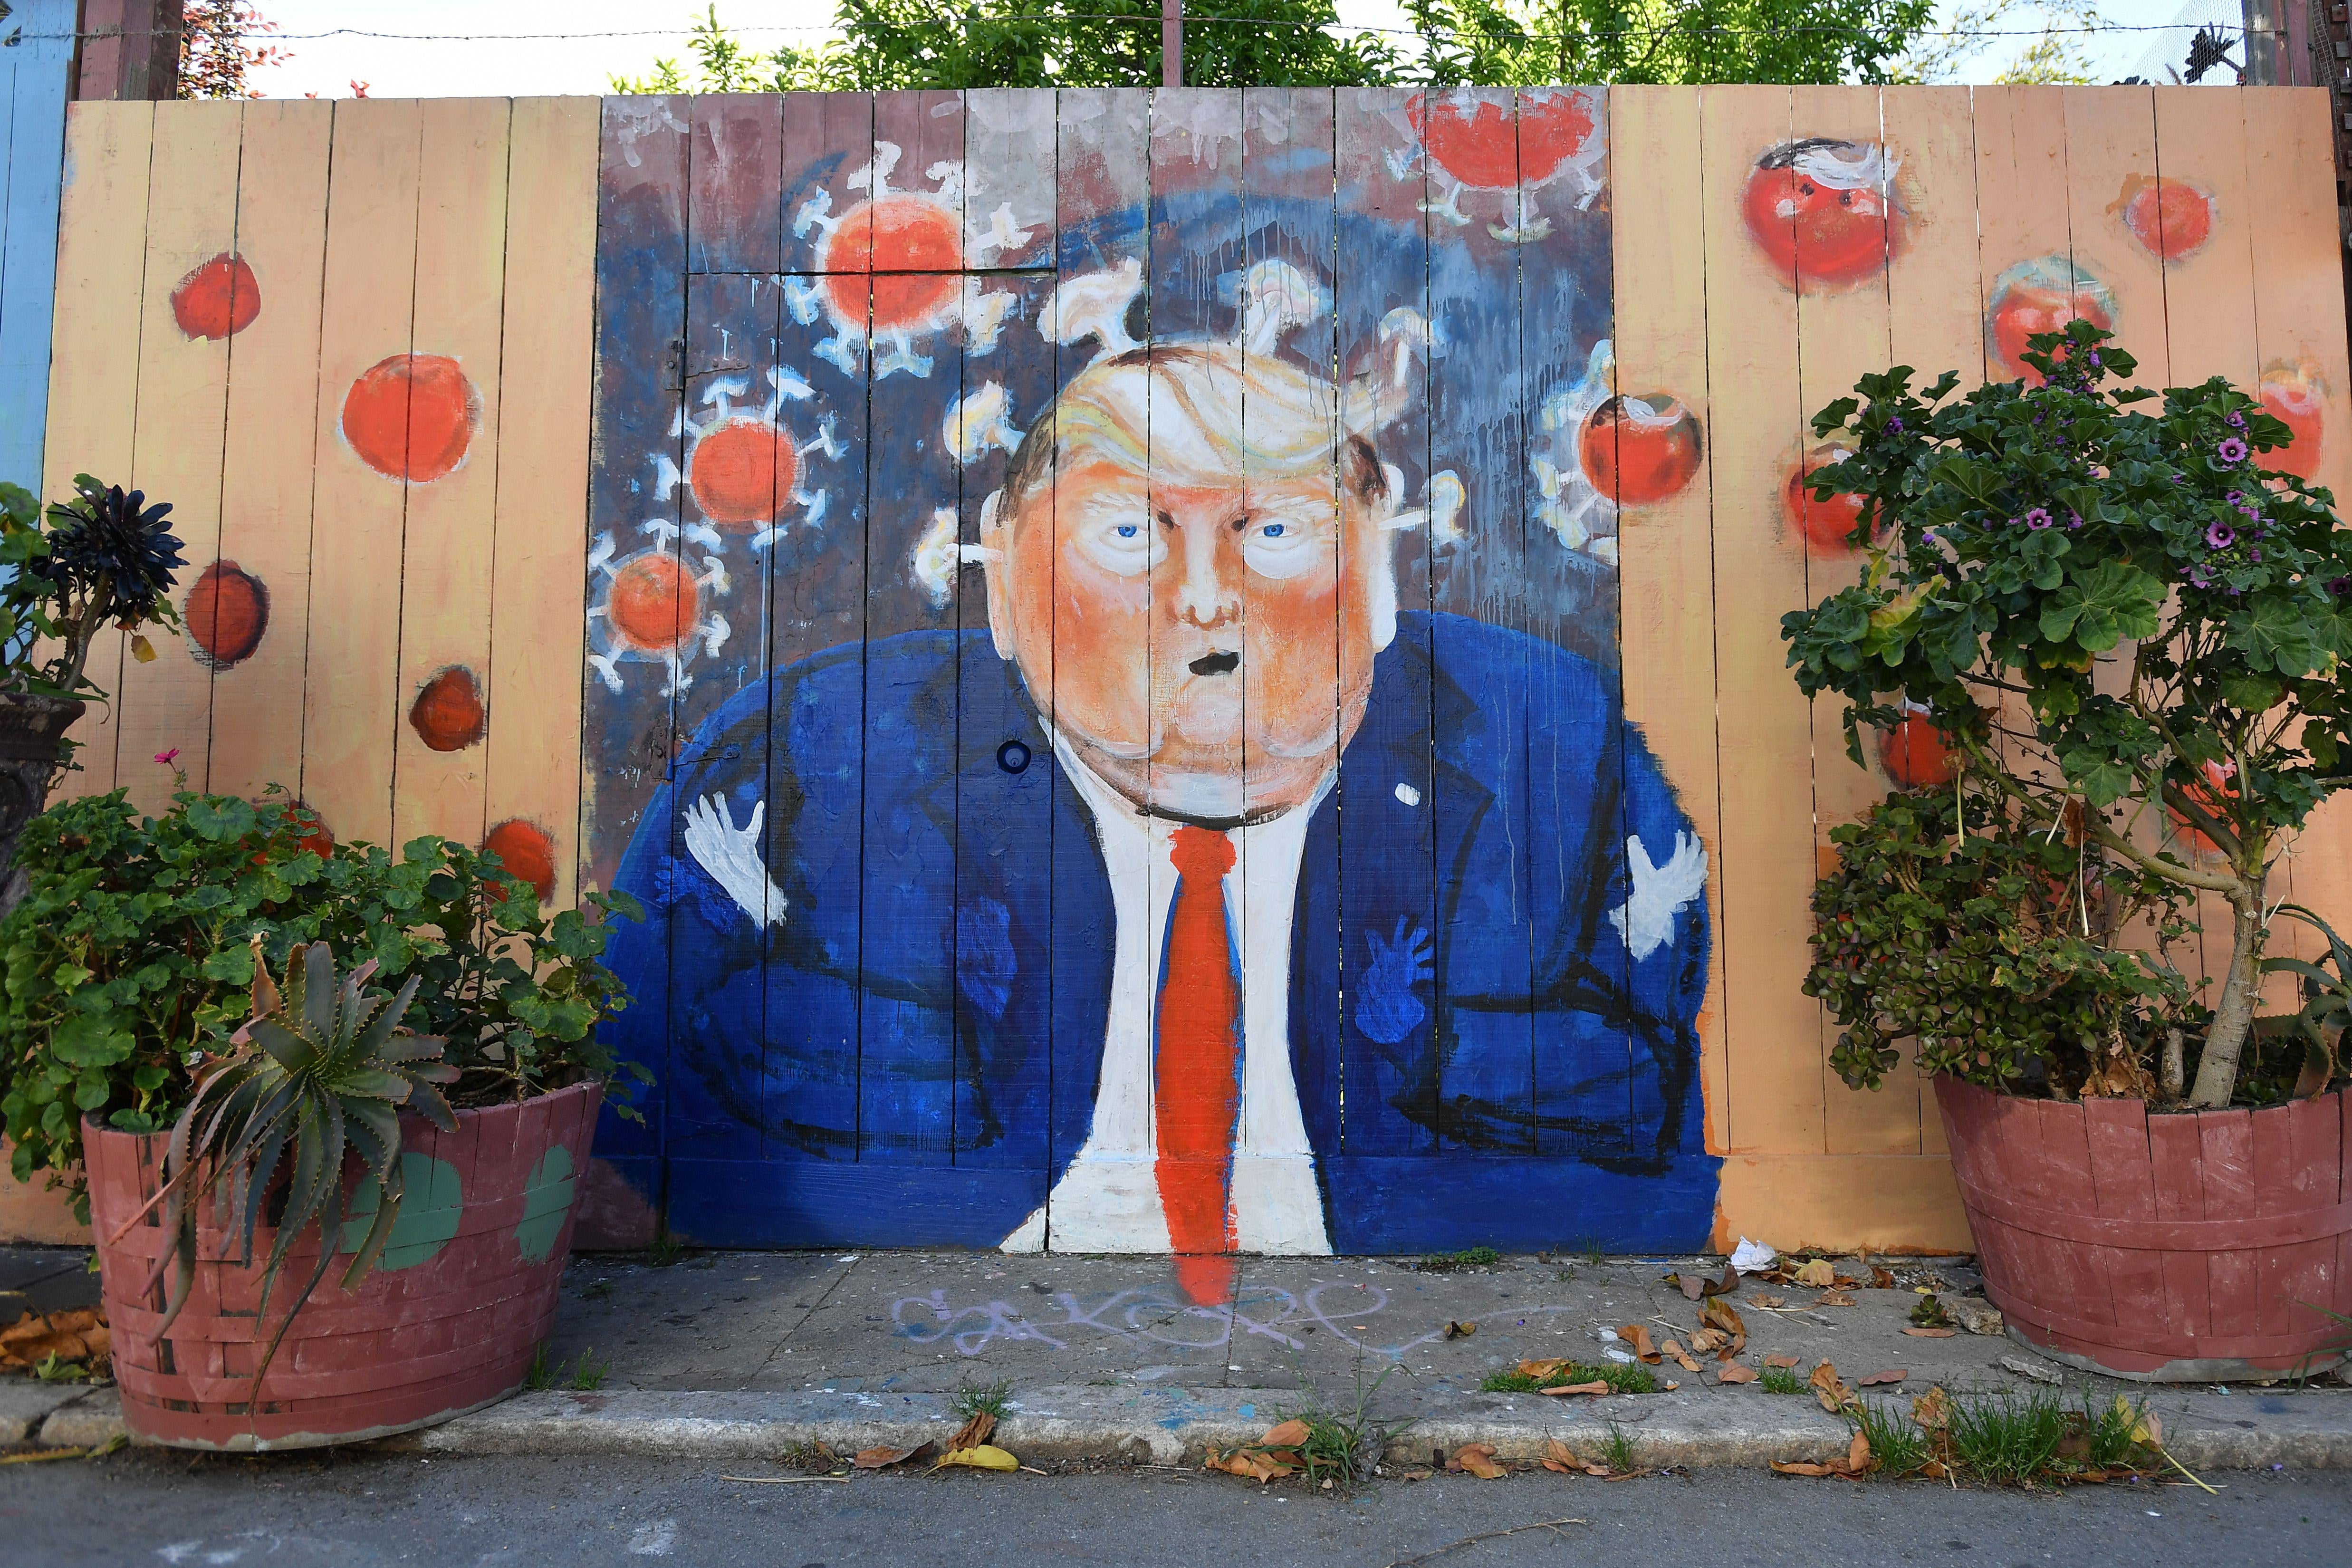 A mural painted on a fence depicts President Donald Trump as the coronavirus.